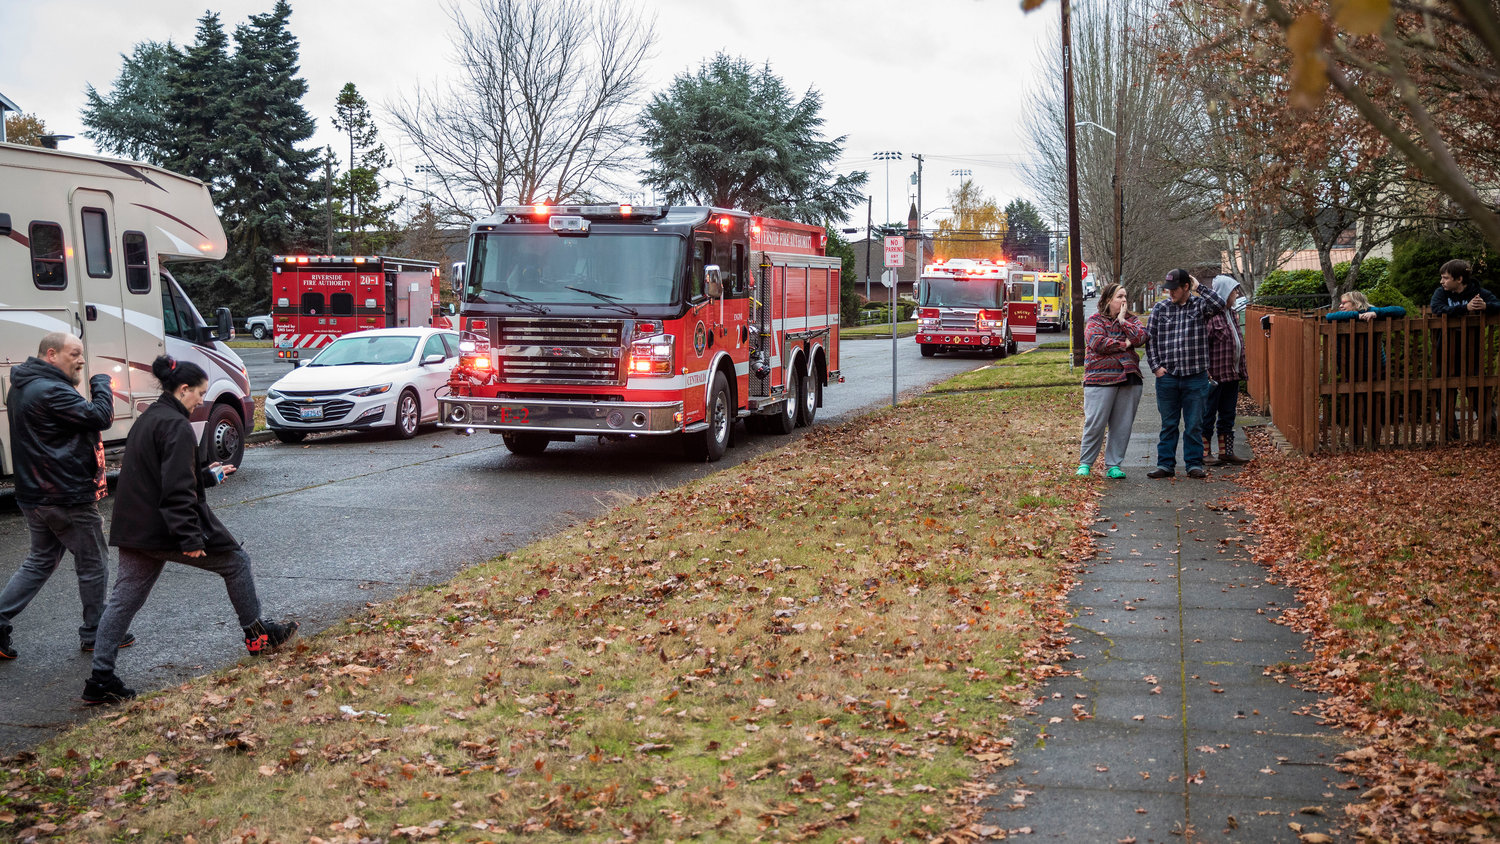 Riverside Fire Authority responds to a residential fire in the 200 block of North Rock Street in Centralia on Friday.